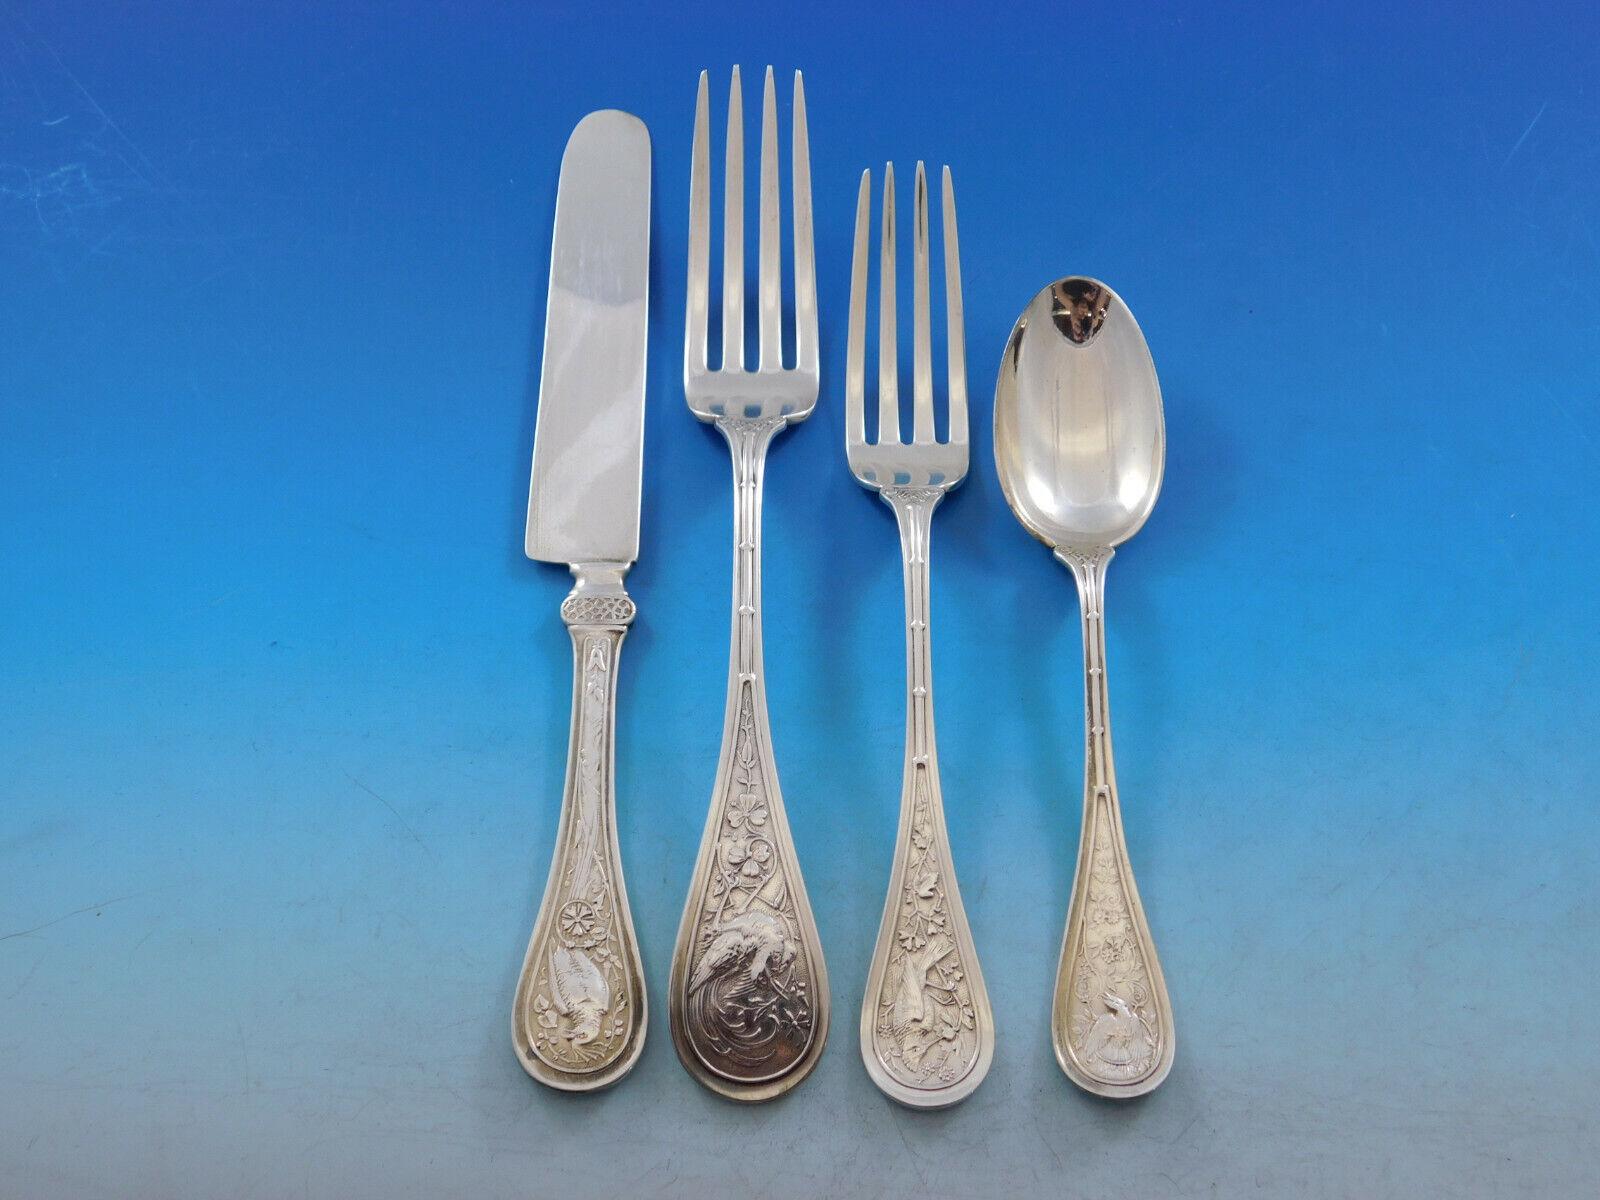 Rare Bird by Wendt, circa 1872, sterling silver Flatware set - 106 pieces. This multi-motif Japonesque pattern has a bamboo design running up the handle, with a swooping or plunging bird amidst assorted flora. This set includes:

8 Knives, flat